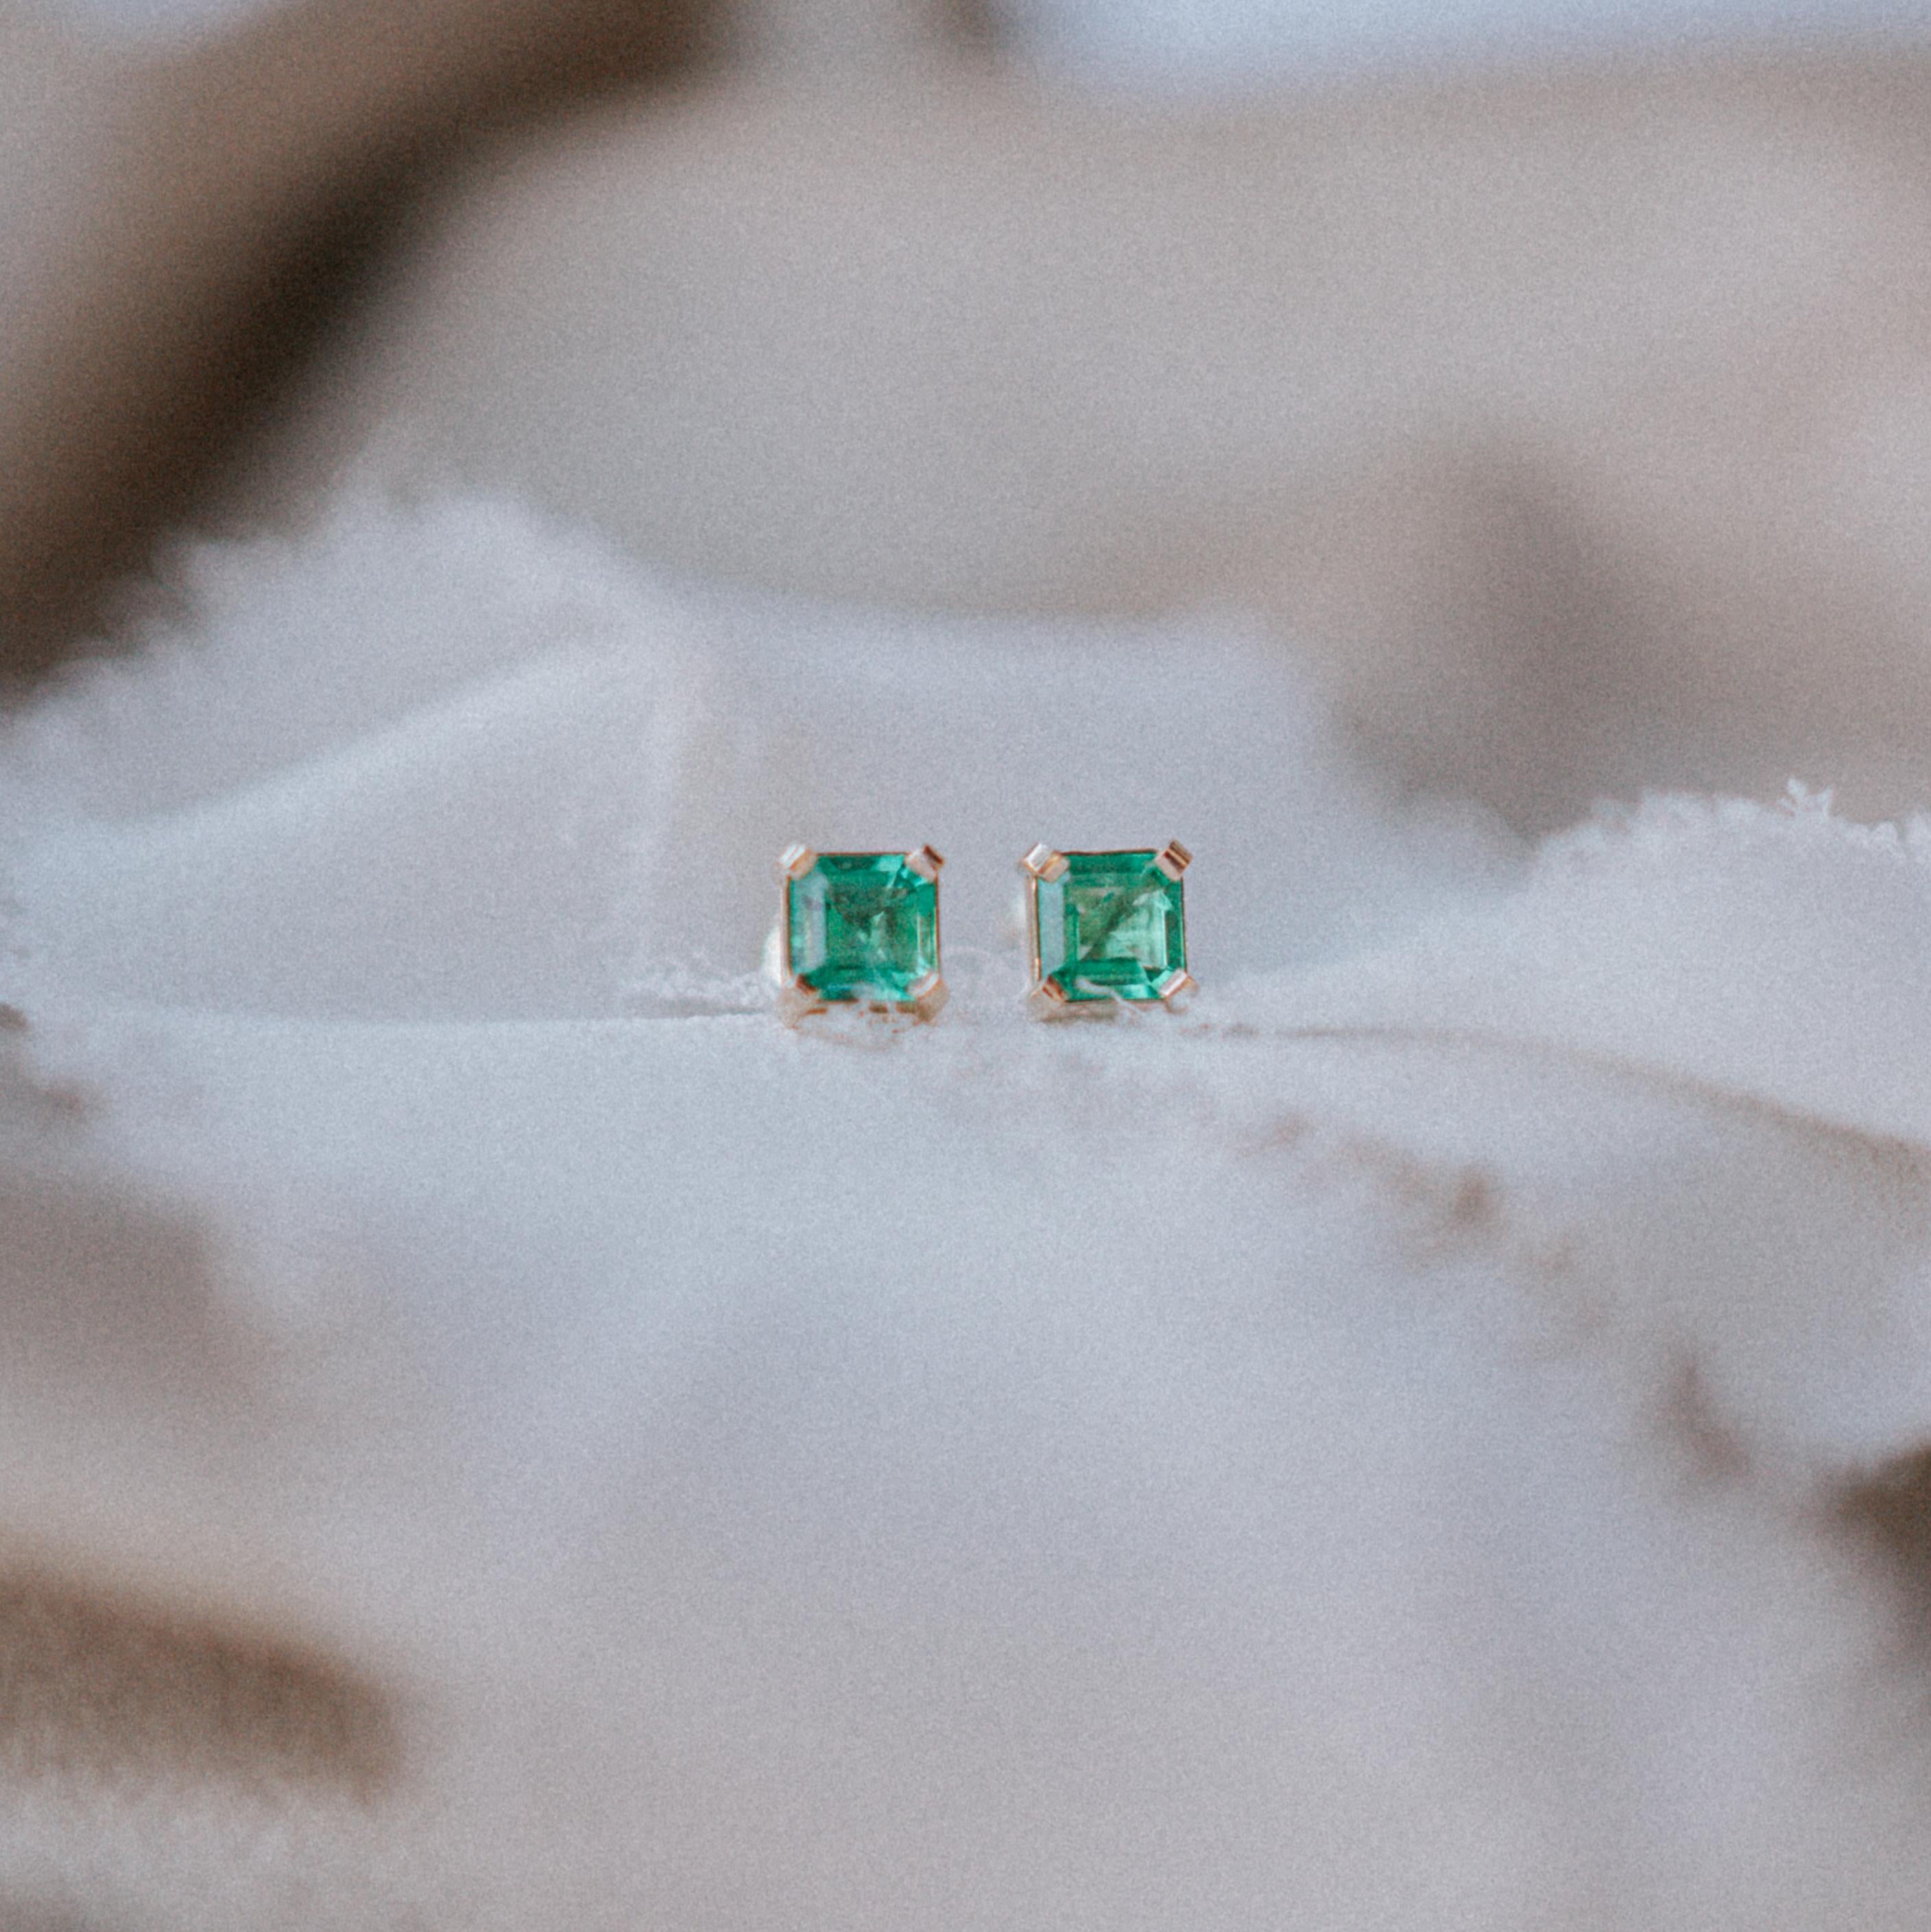 Stud earrings with square emeralds set in yellow gold 14k.
Emeralds 0.5 ct each (5 mm x 5 mm). Square emerald cut.
Provenance of the gemstones: Brazil.
Ready to ship
